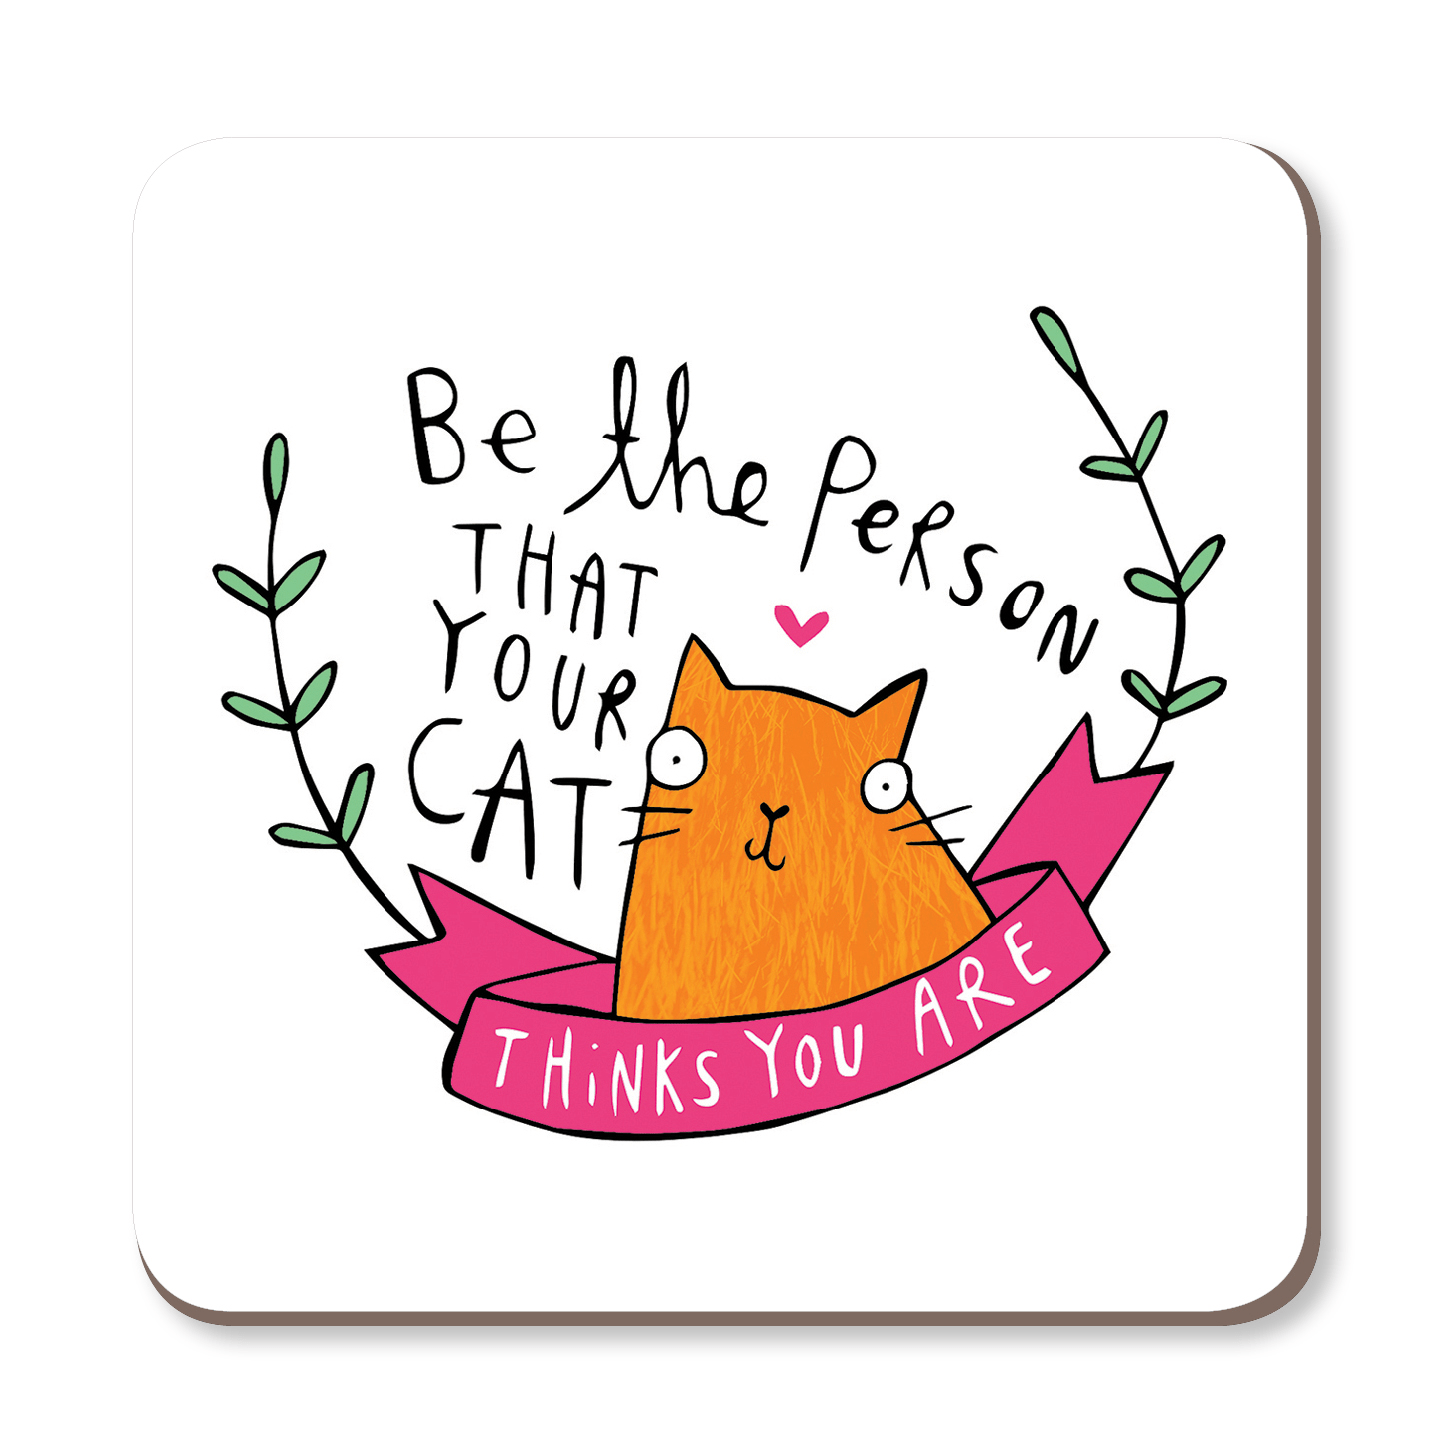 Be The Person Your Cat Thinks You Are Coaster by Katie Abey - Whale and Bird